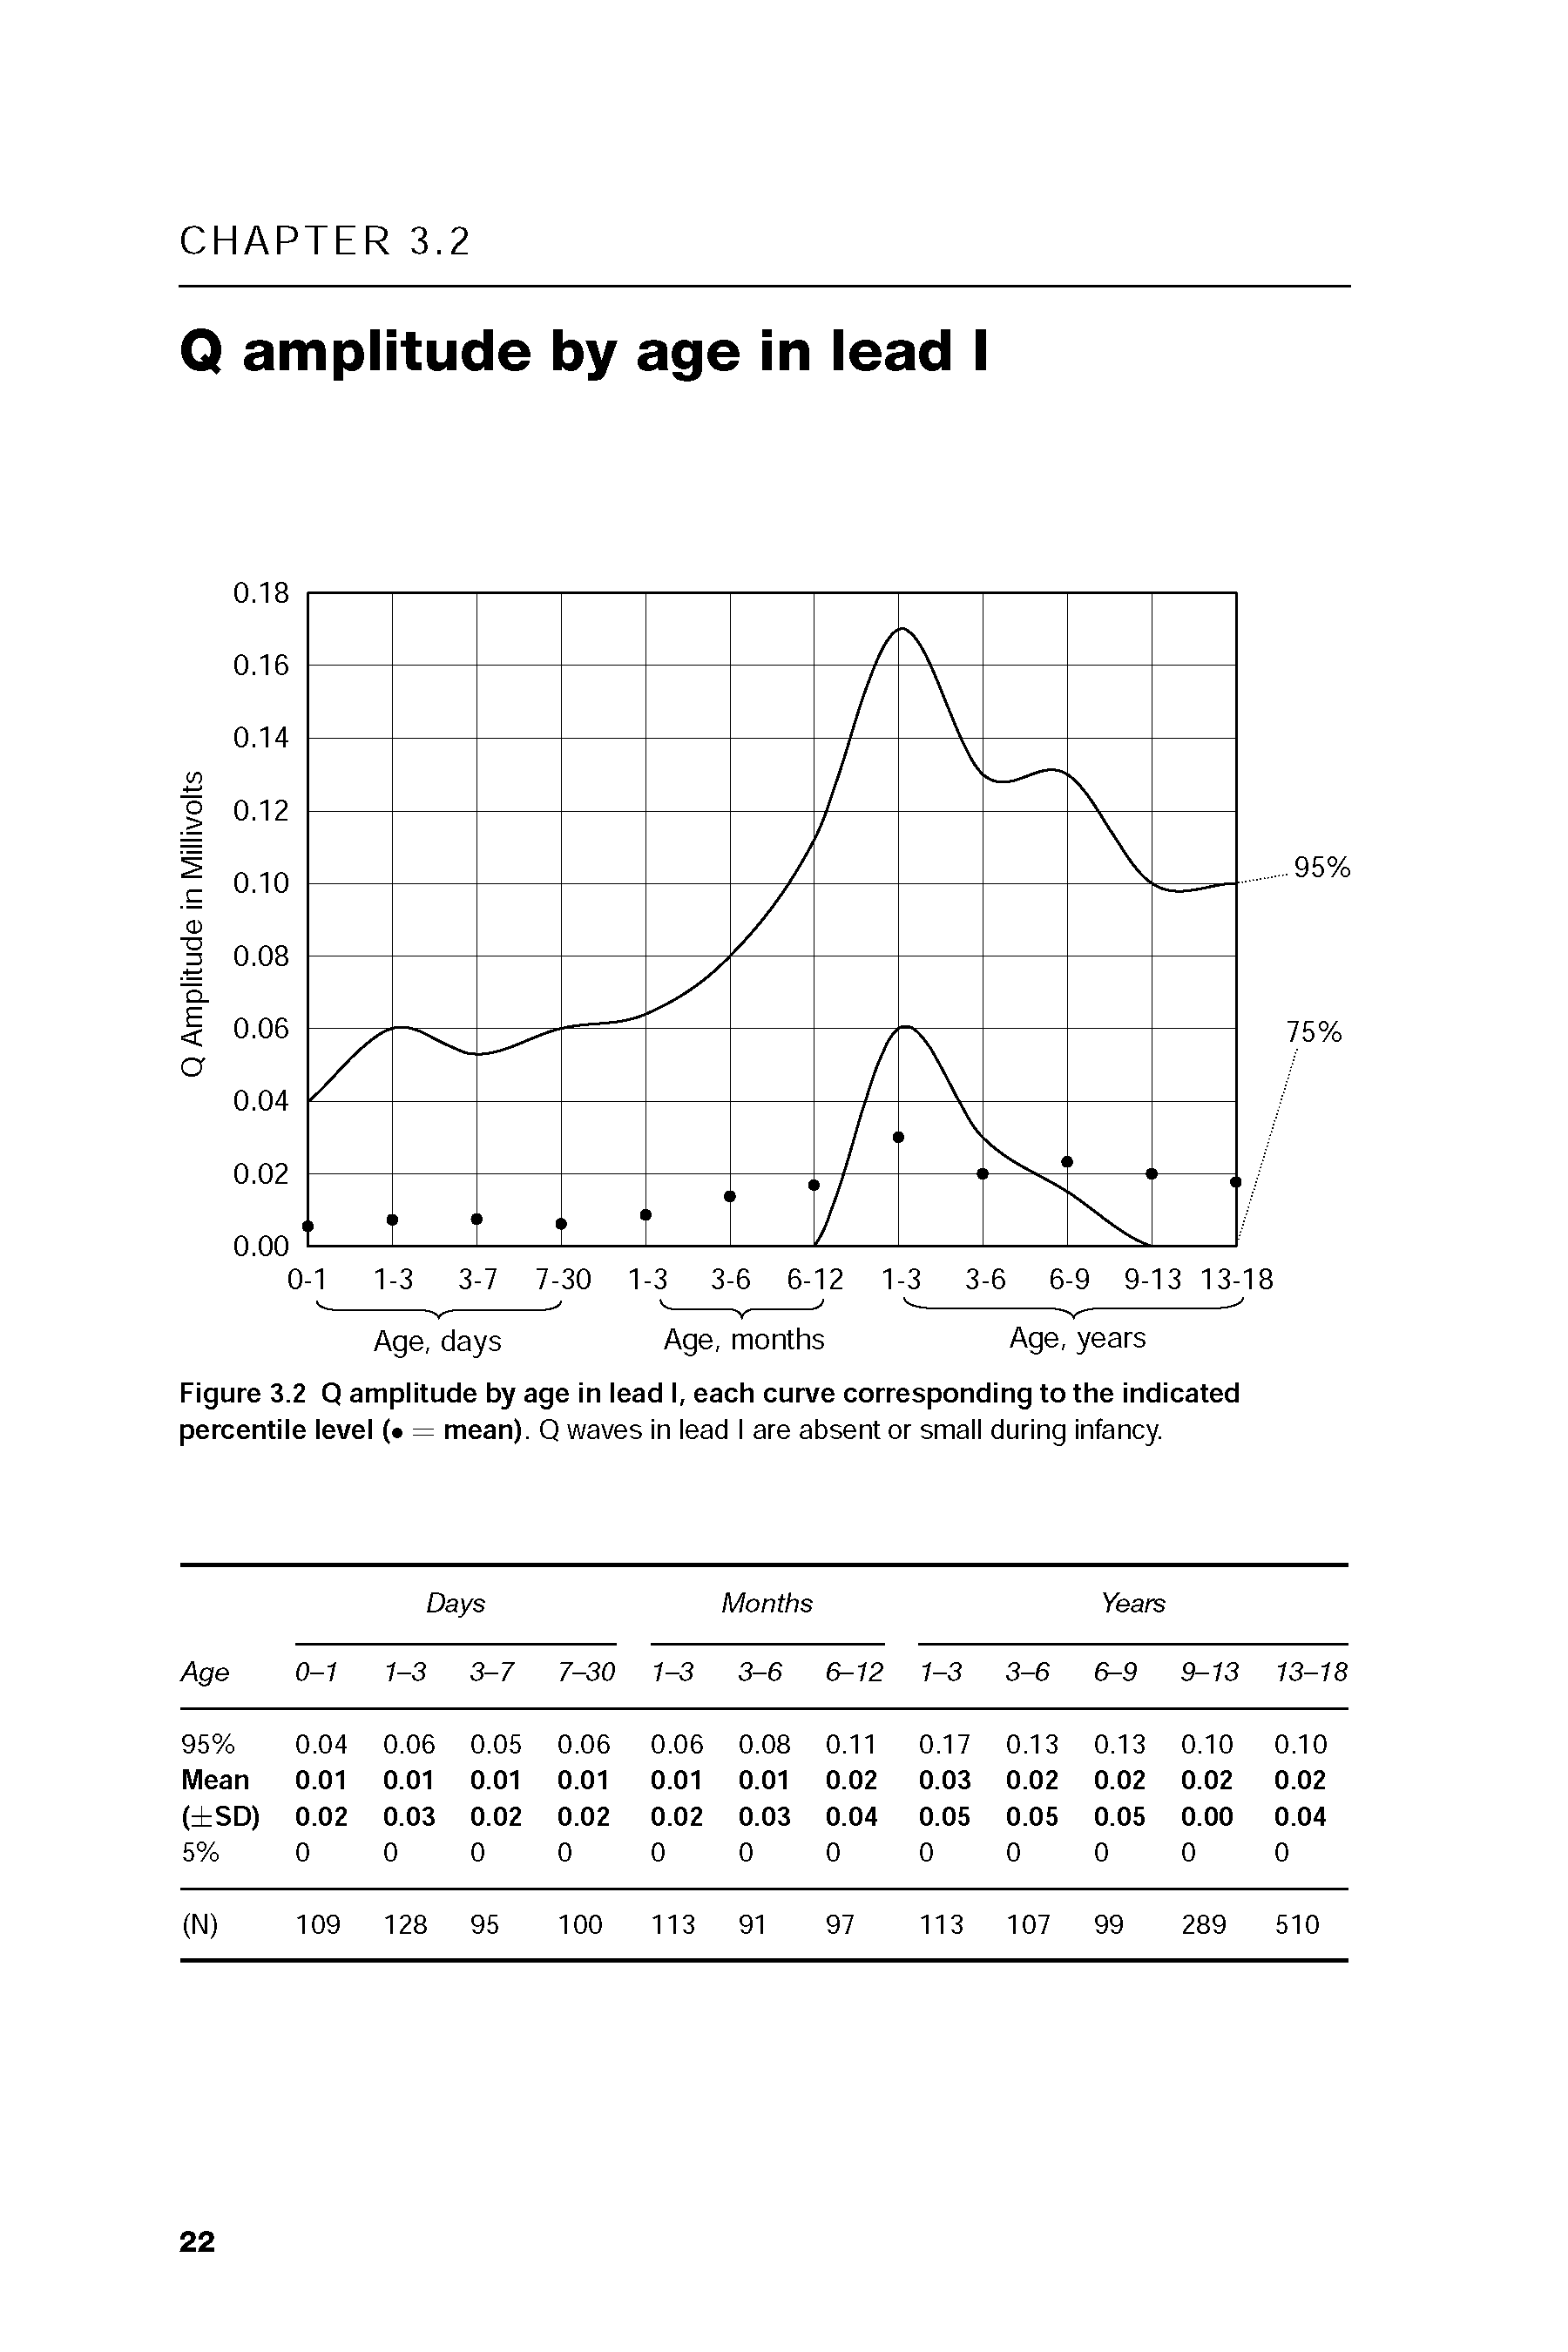 Figure 3.2 Q amplitude by age in lead I, each curve corresponding to the indicated percentile level ( = mean). Q waves in lead I are absent or small during Infancy.